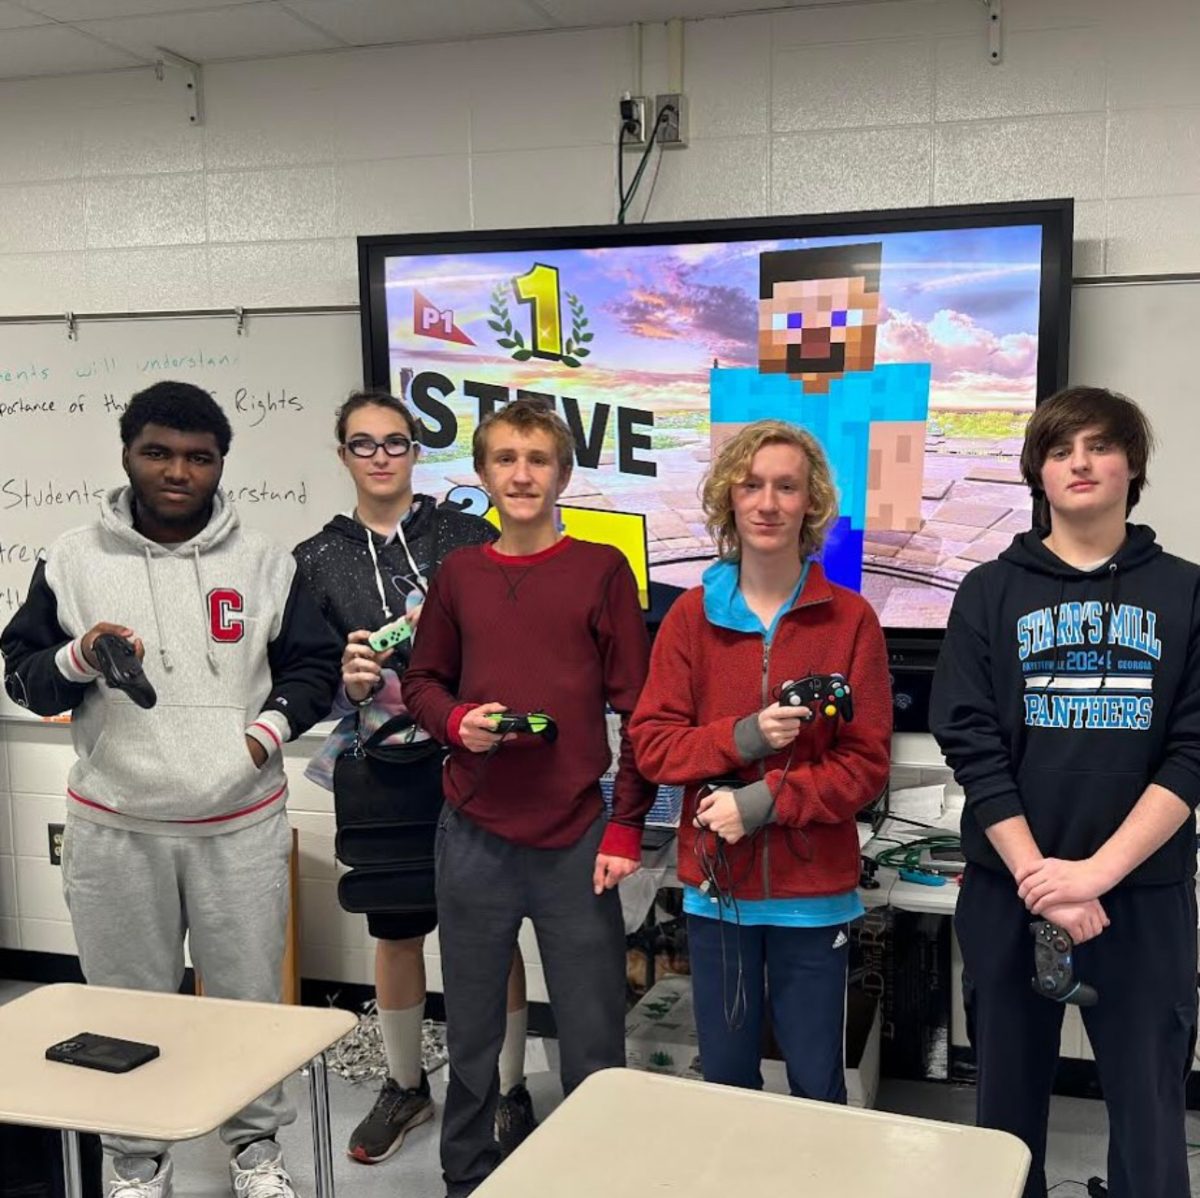 Members of the Starr’s Mill Esports team pose after advancing to the second round of playoffs. The team is able to practice at home and play their favorite games. This year’s team played Super Smash Bros. on the Nintendo Switch.